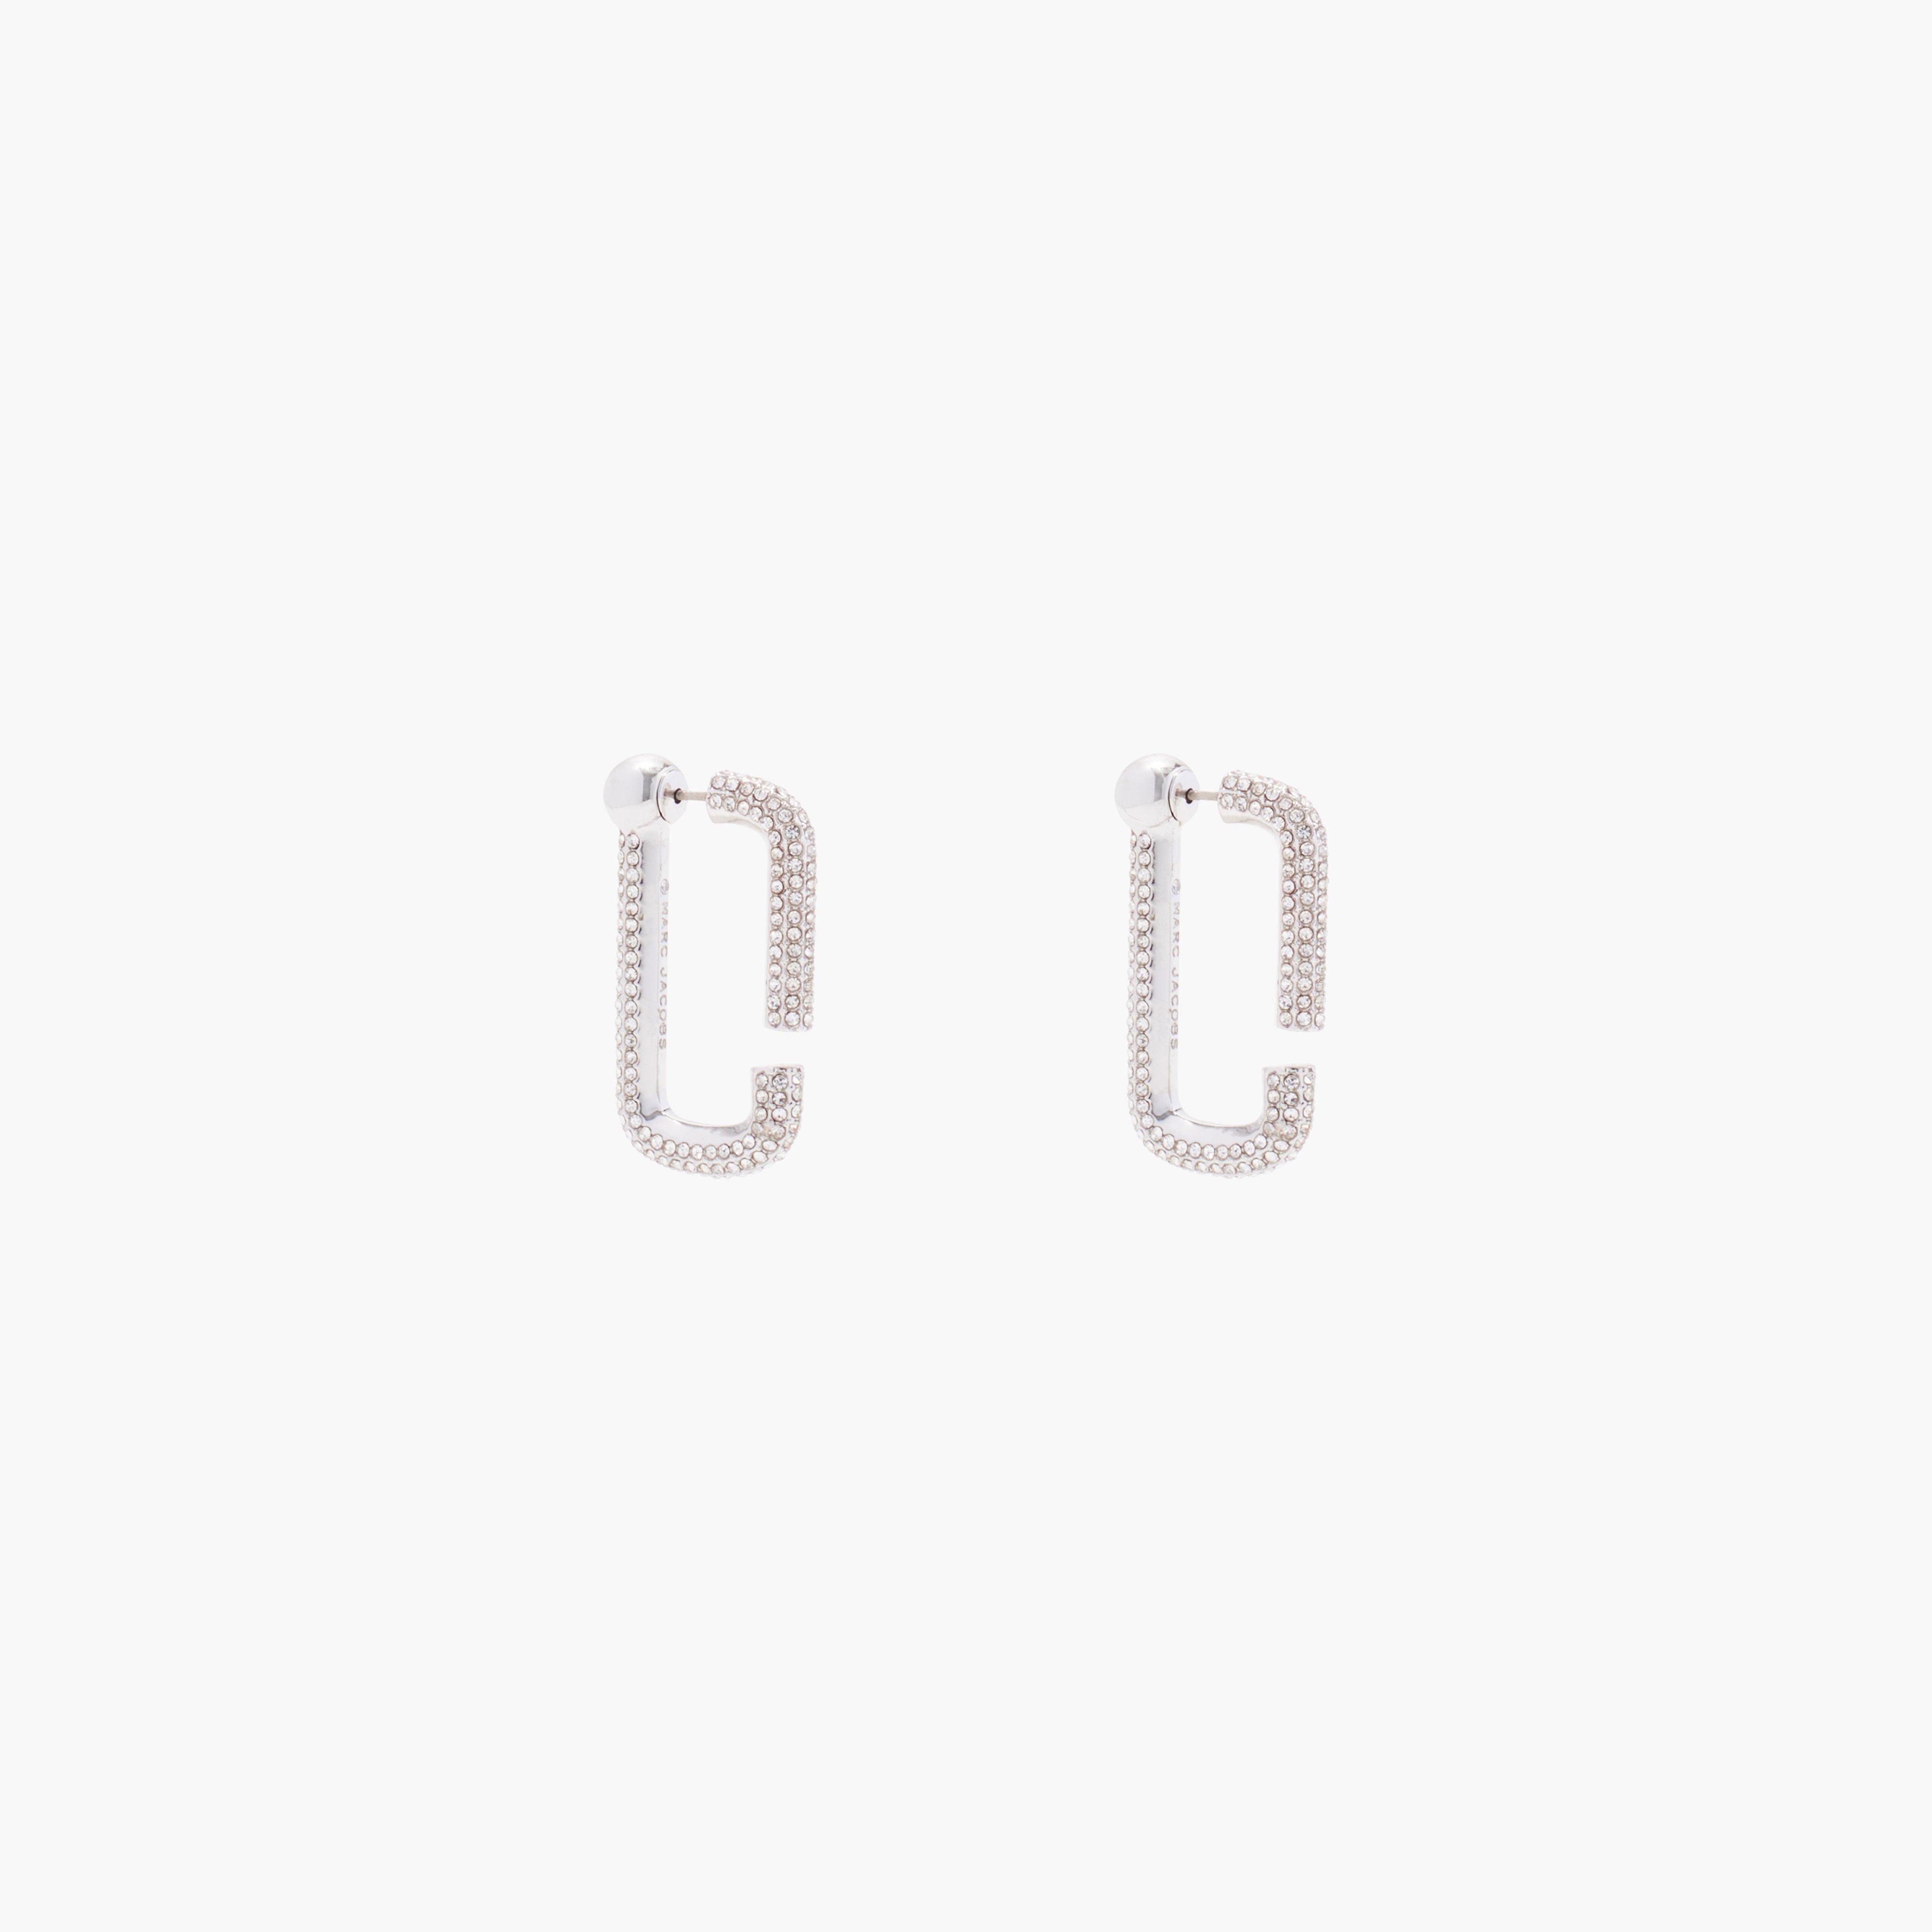 Marc by Marc jacobs The J Marc Crystal Hoops,CRYSTAL/SILVER